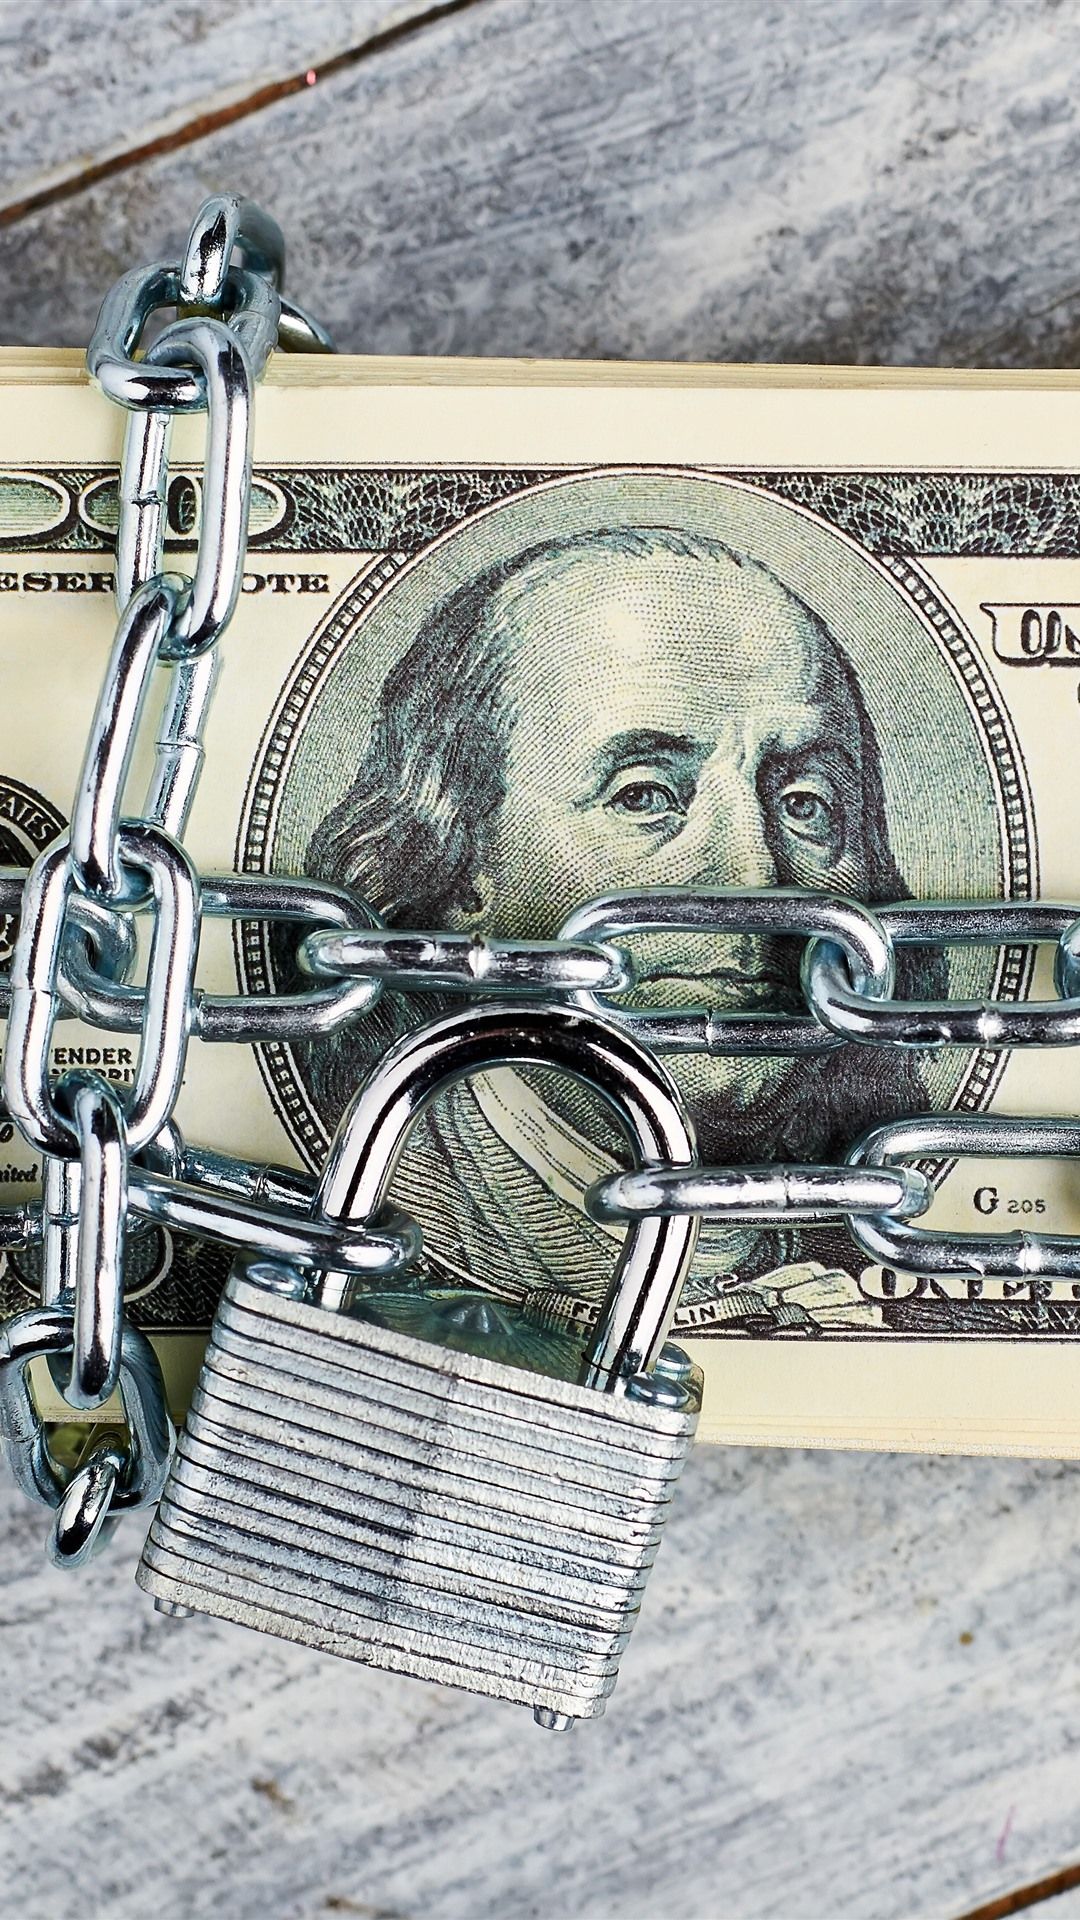 US Dollars, Chain, Lock 1242x2688 IPhone 11 Pro XS Max Wallpaper, Background, Picture, Image